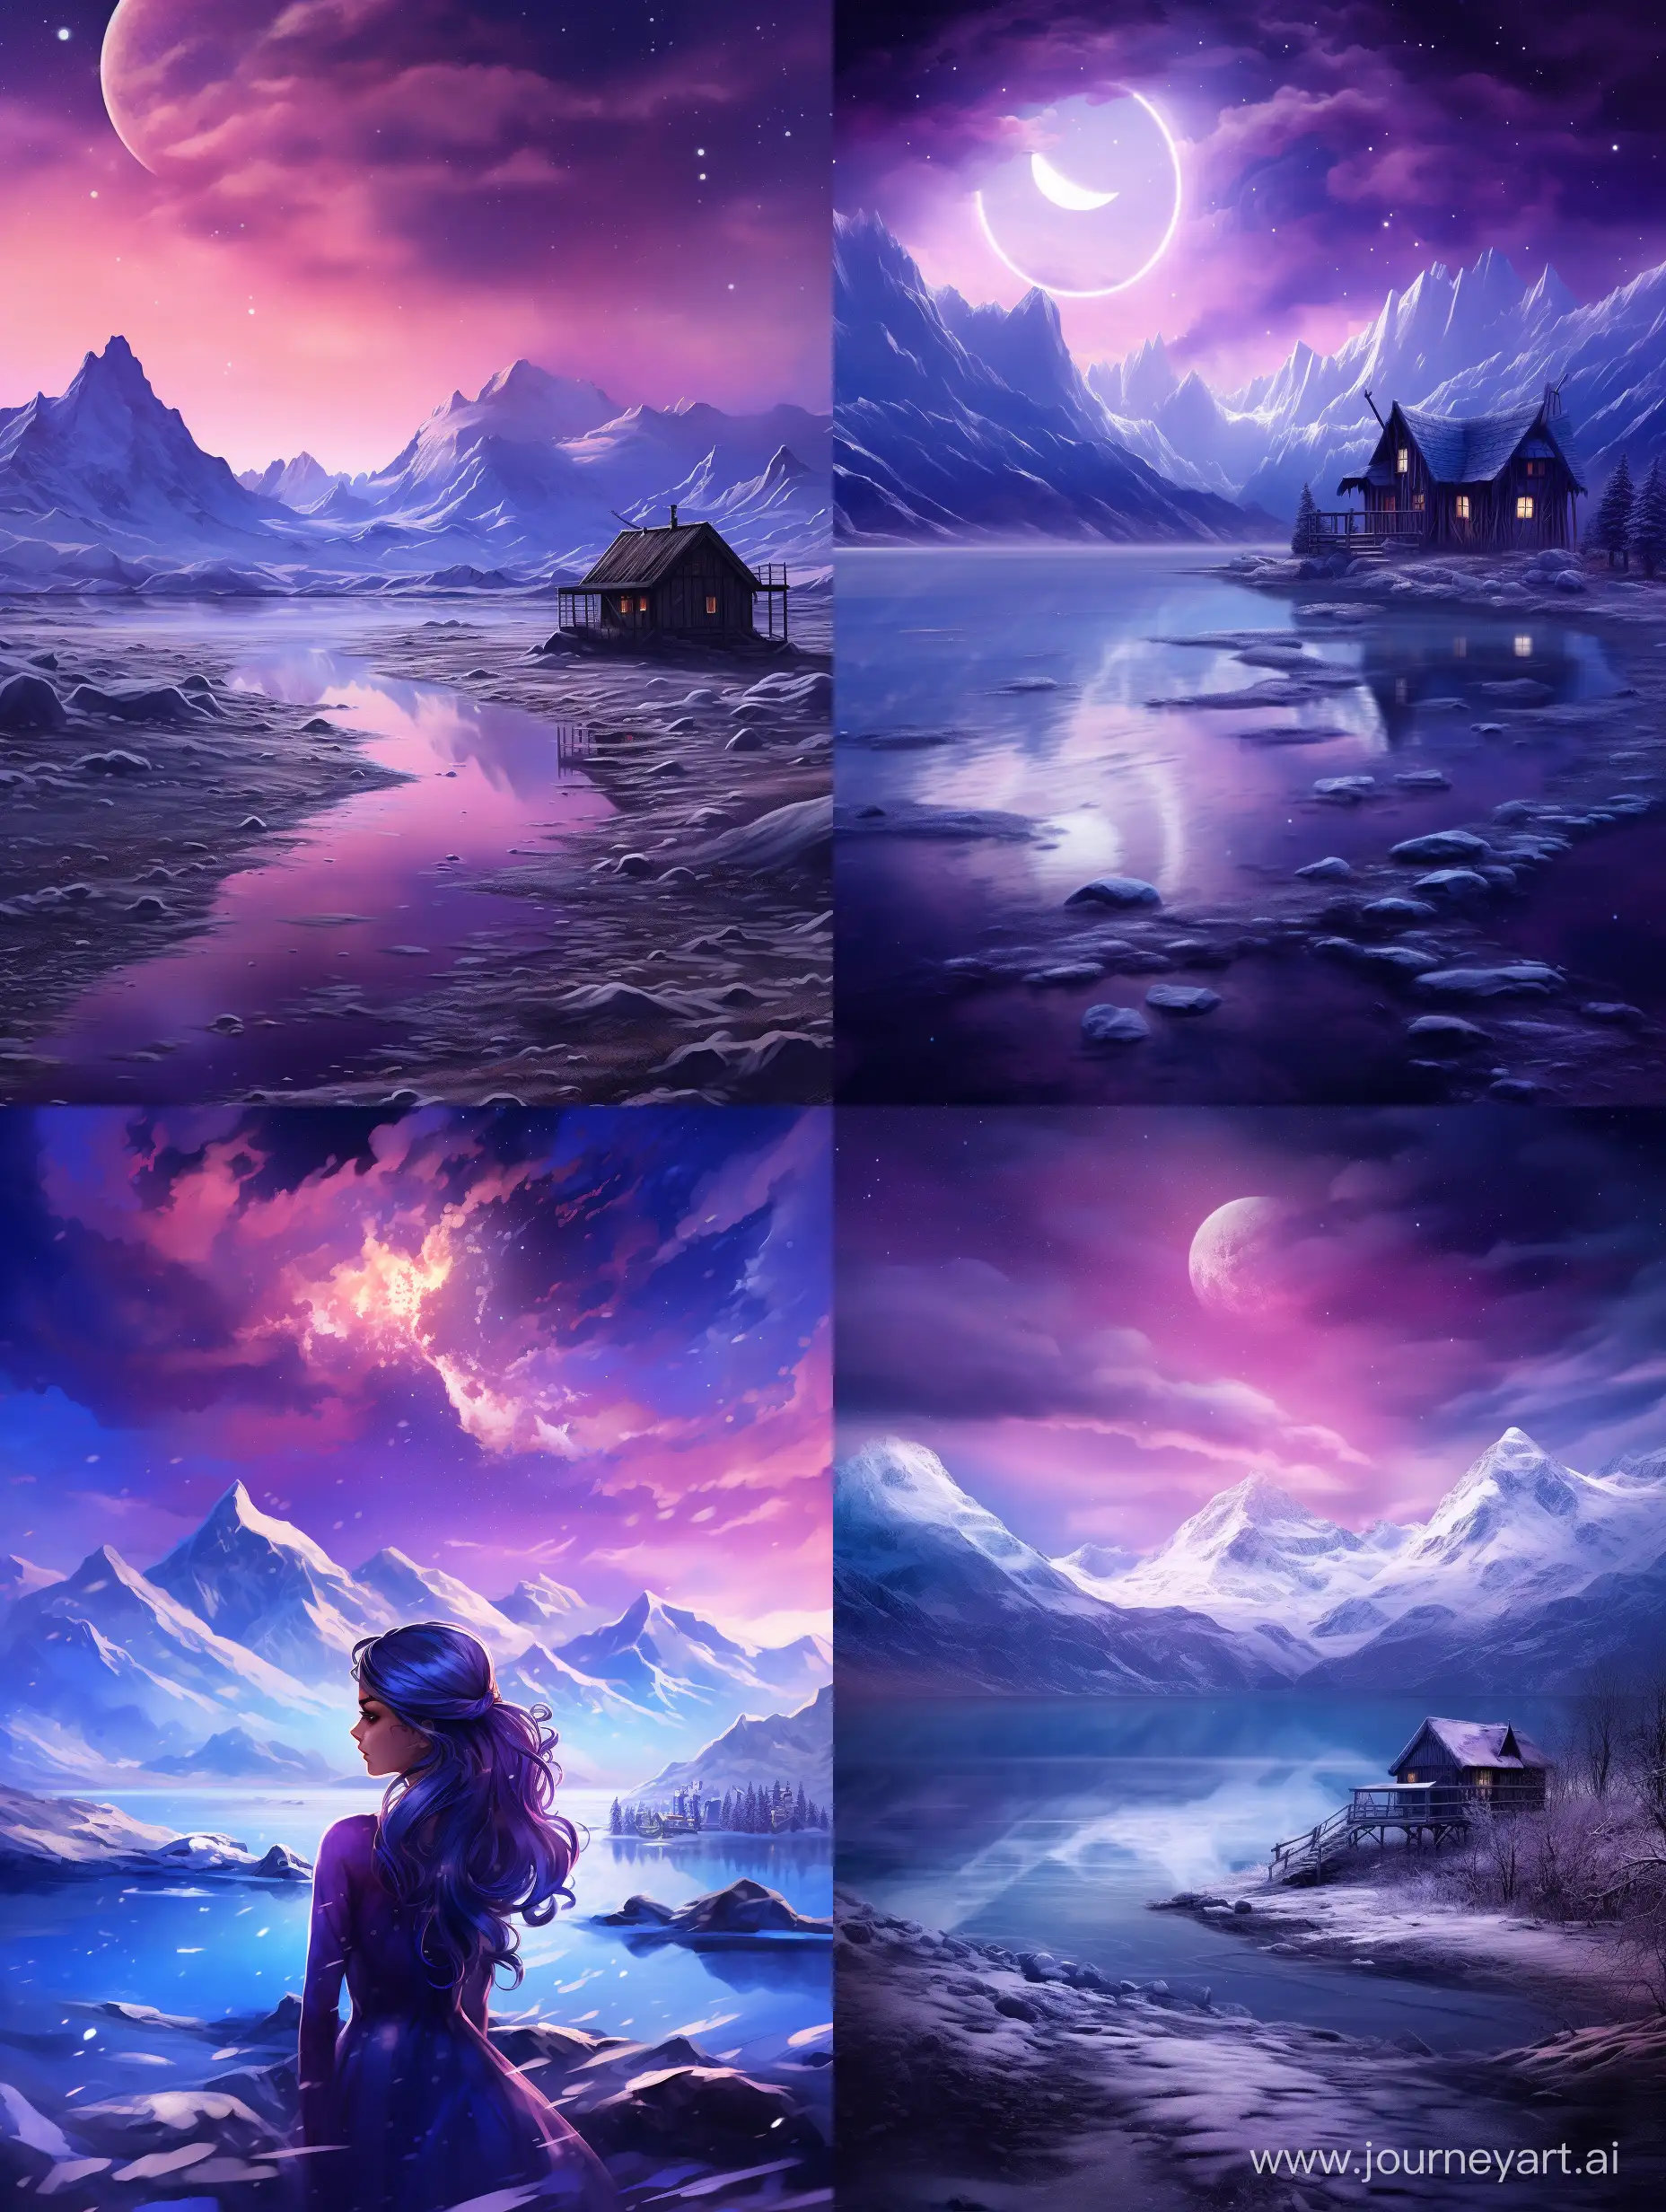 Enchanting-Galactic-Purple-Landscape-with-Wooden-Minimal-House-and-Snowy-Surroundings